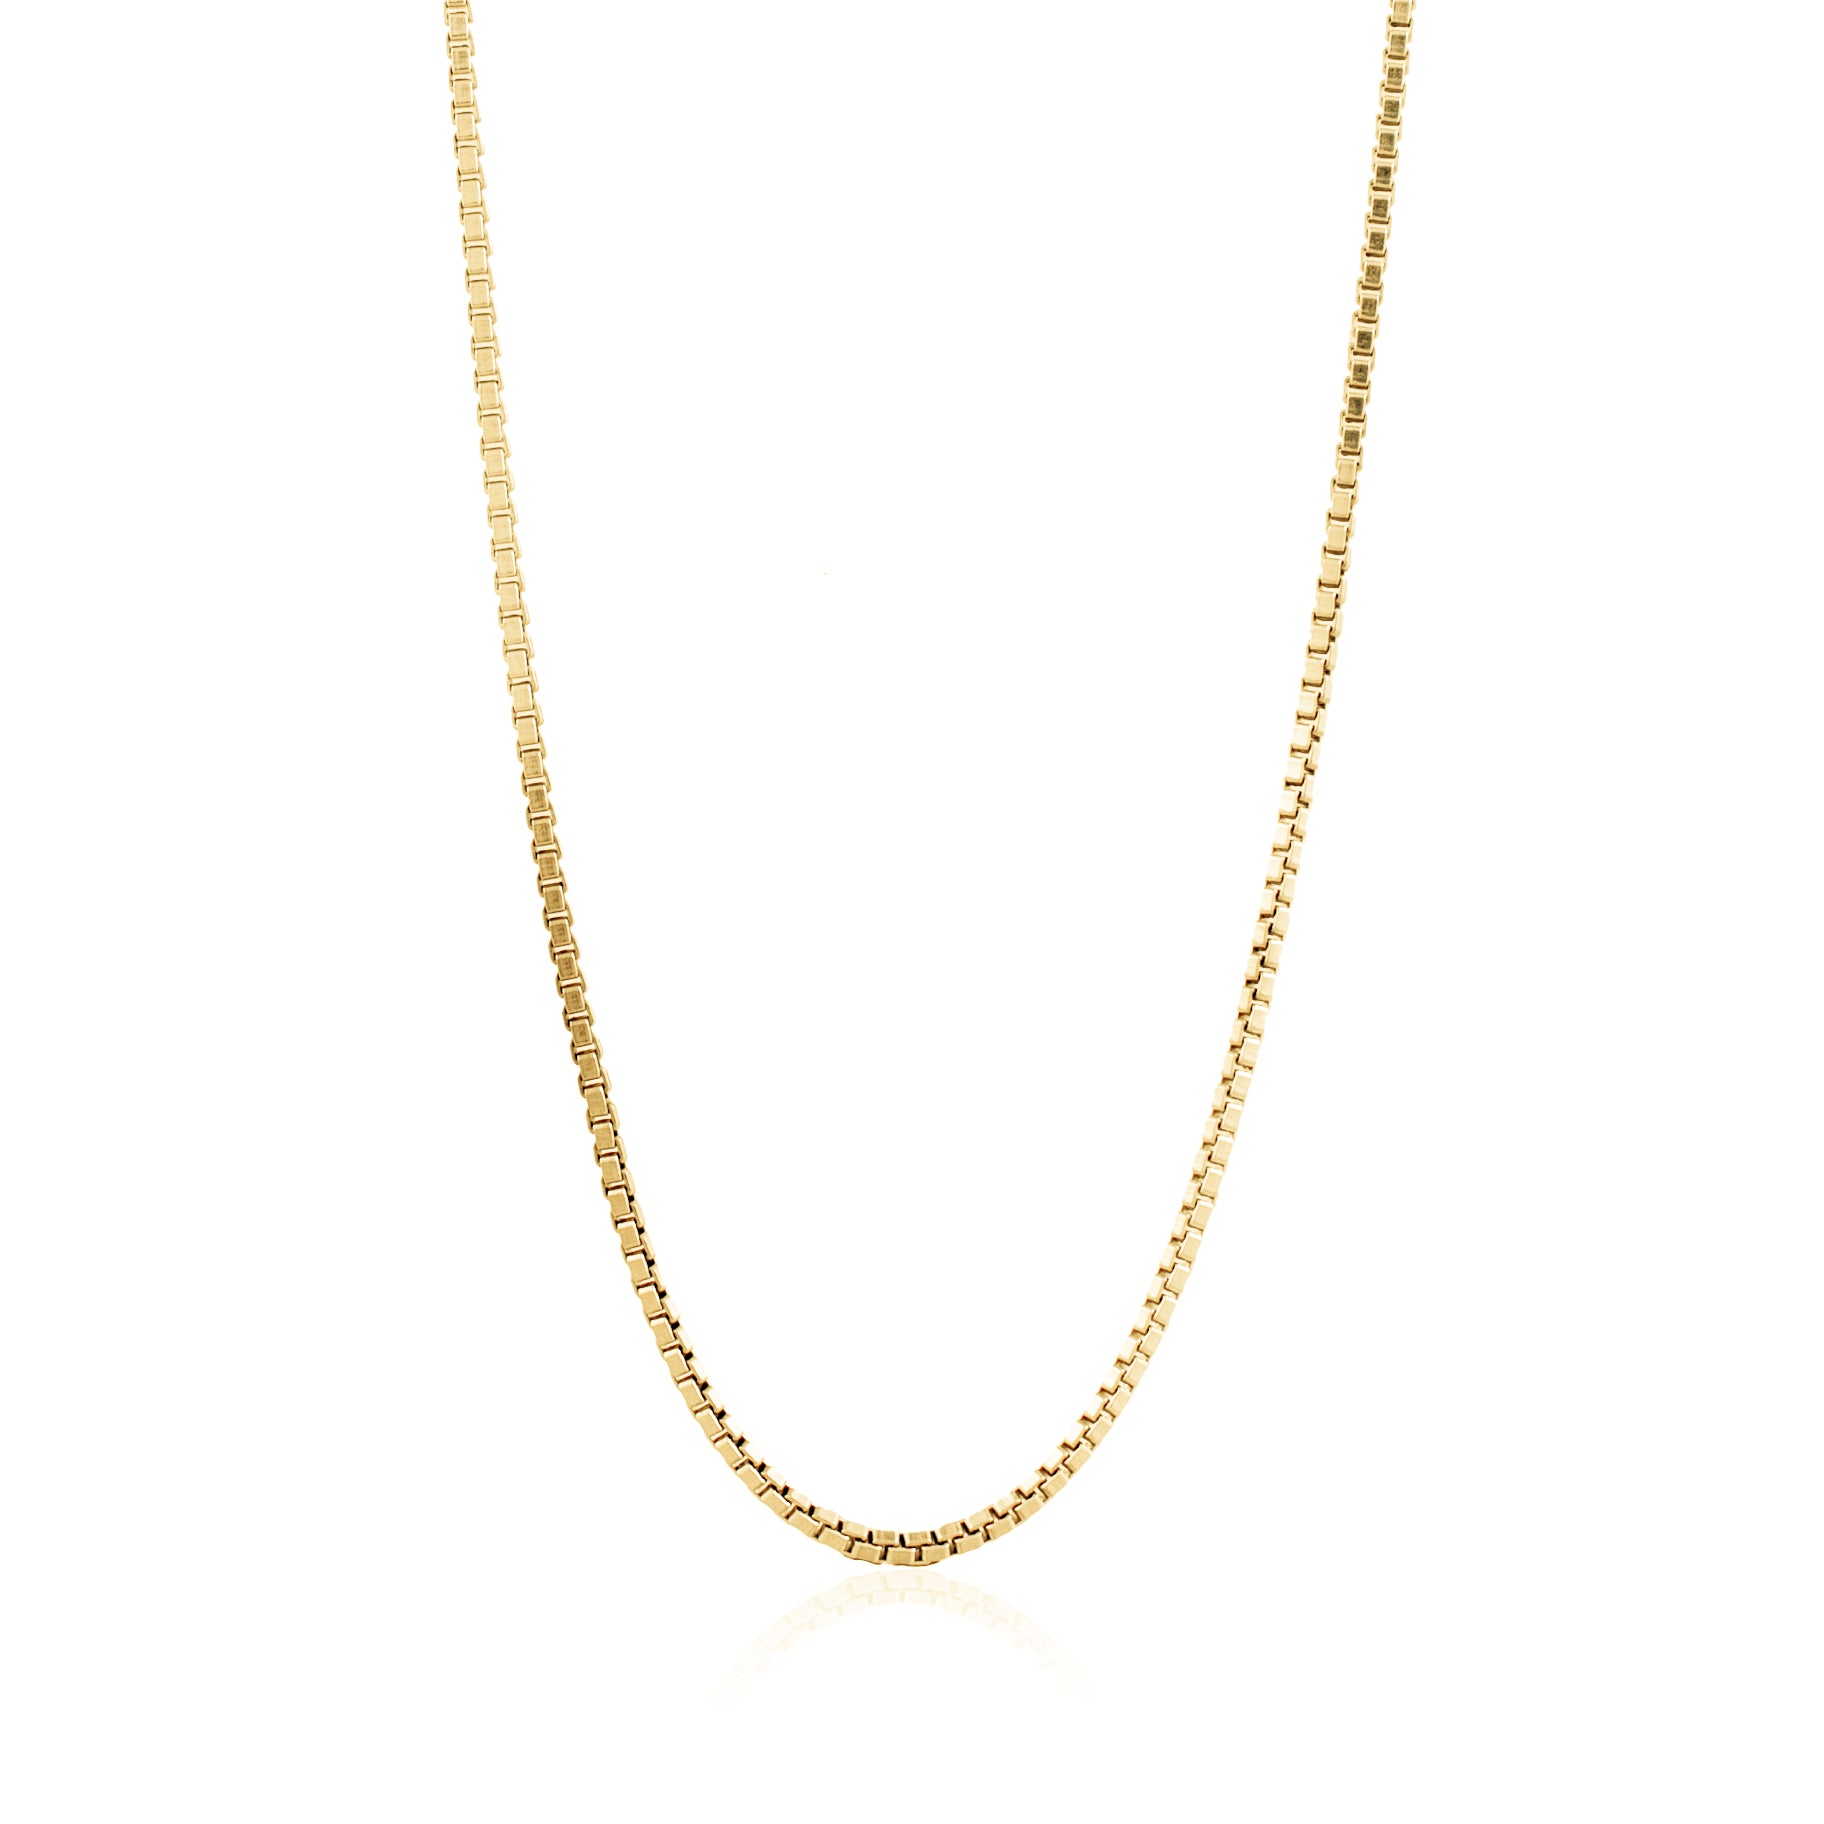 Luna & Rose Bahama Box Chain Necklace - Gold made from recycled Sterling Silver